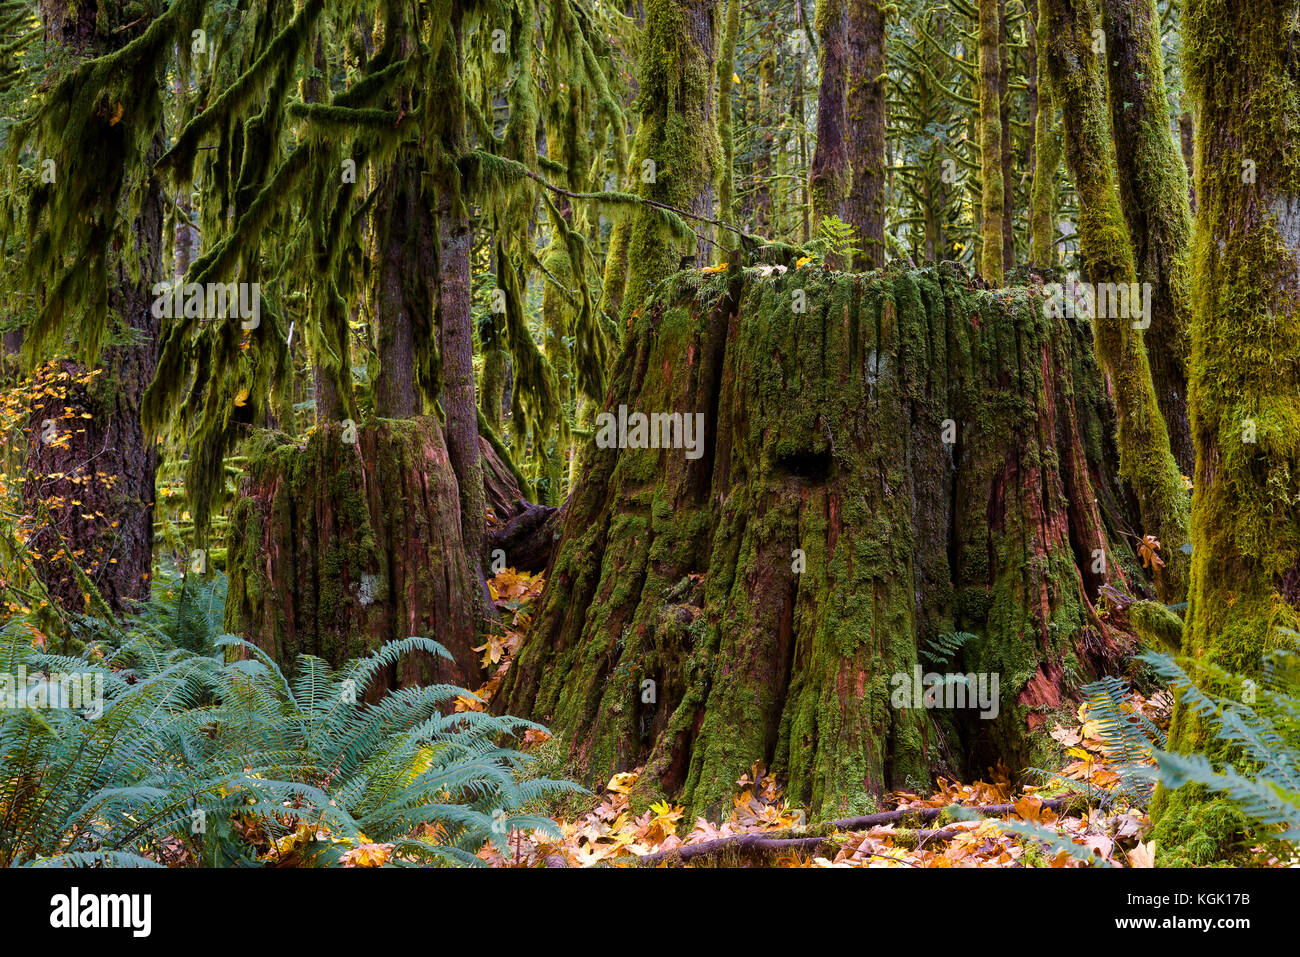 Old growth tree stumps in previously logged second growth forest, Golden Ears Provincial Park, British Columbia, Canada Stock Photo